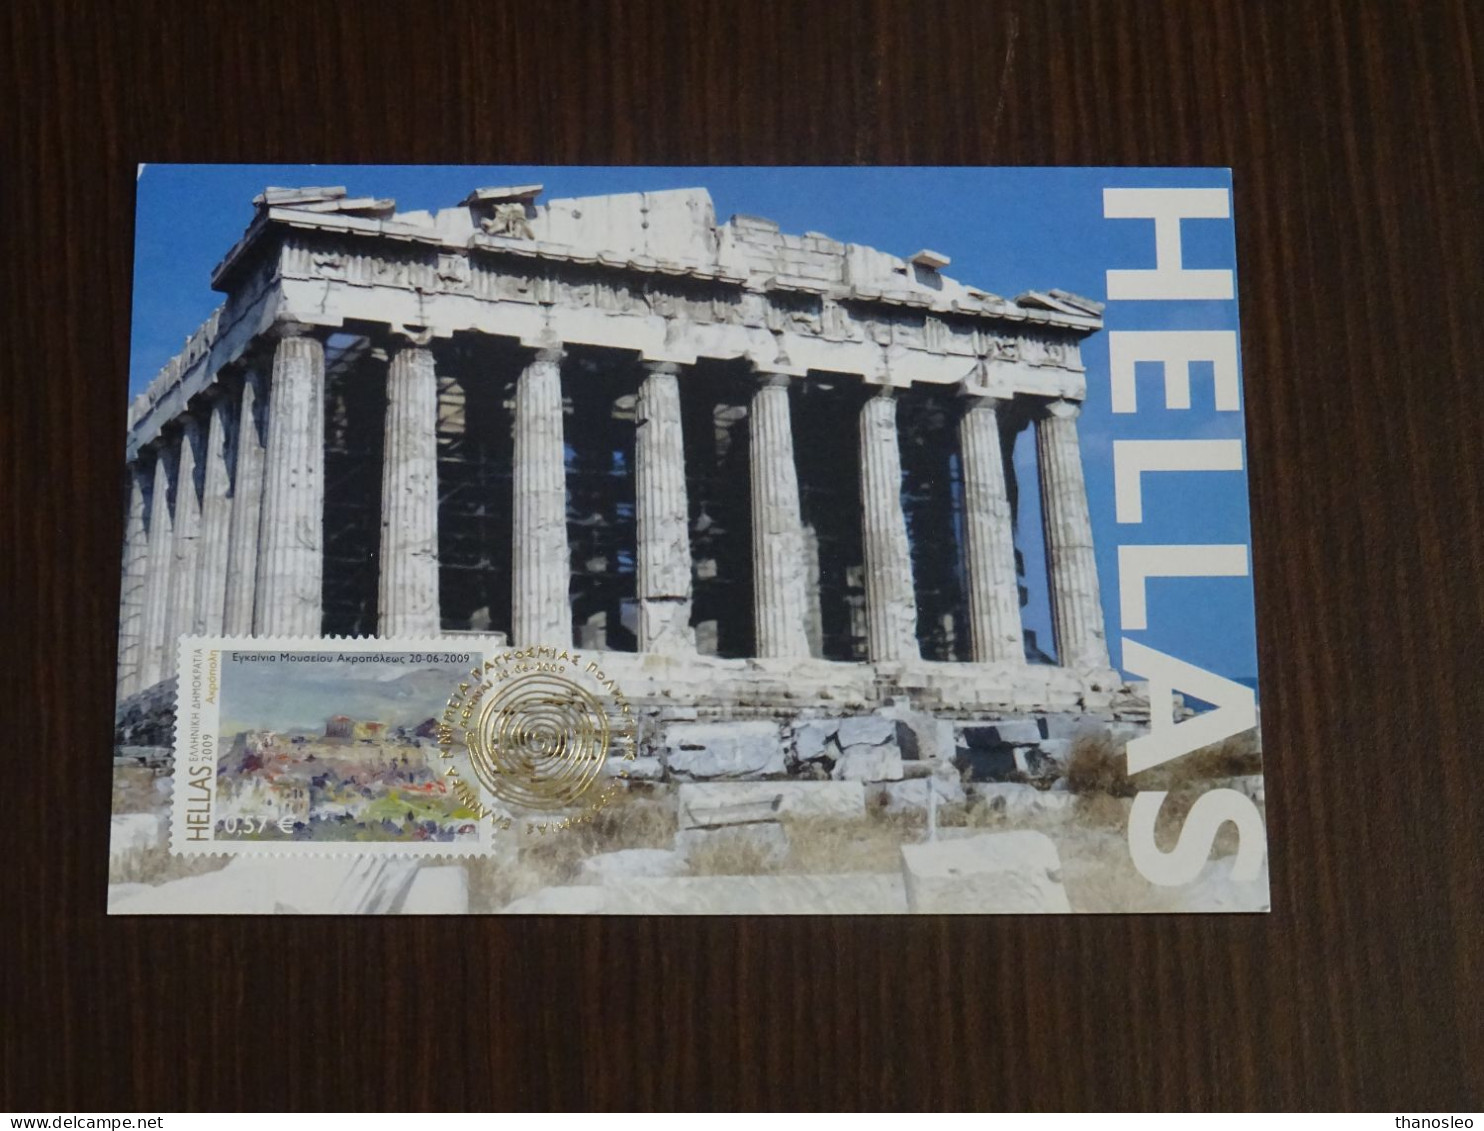 Greece 2009 Greek Monuments Of World Cultural Heritage Parthenon Card VF - Cartes-maximum (CM)